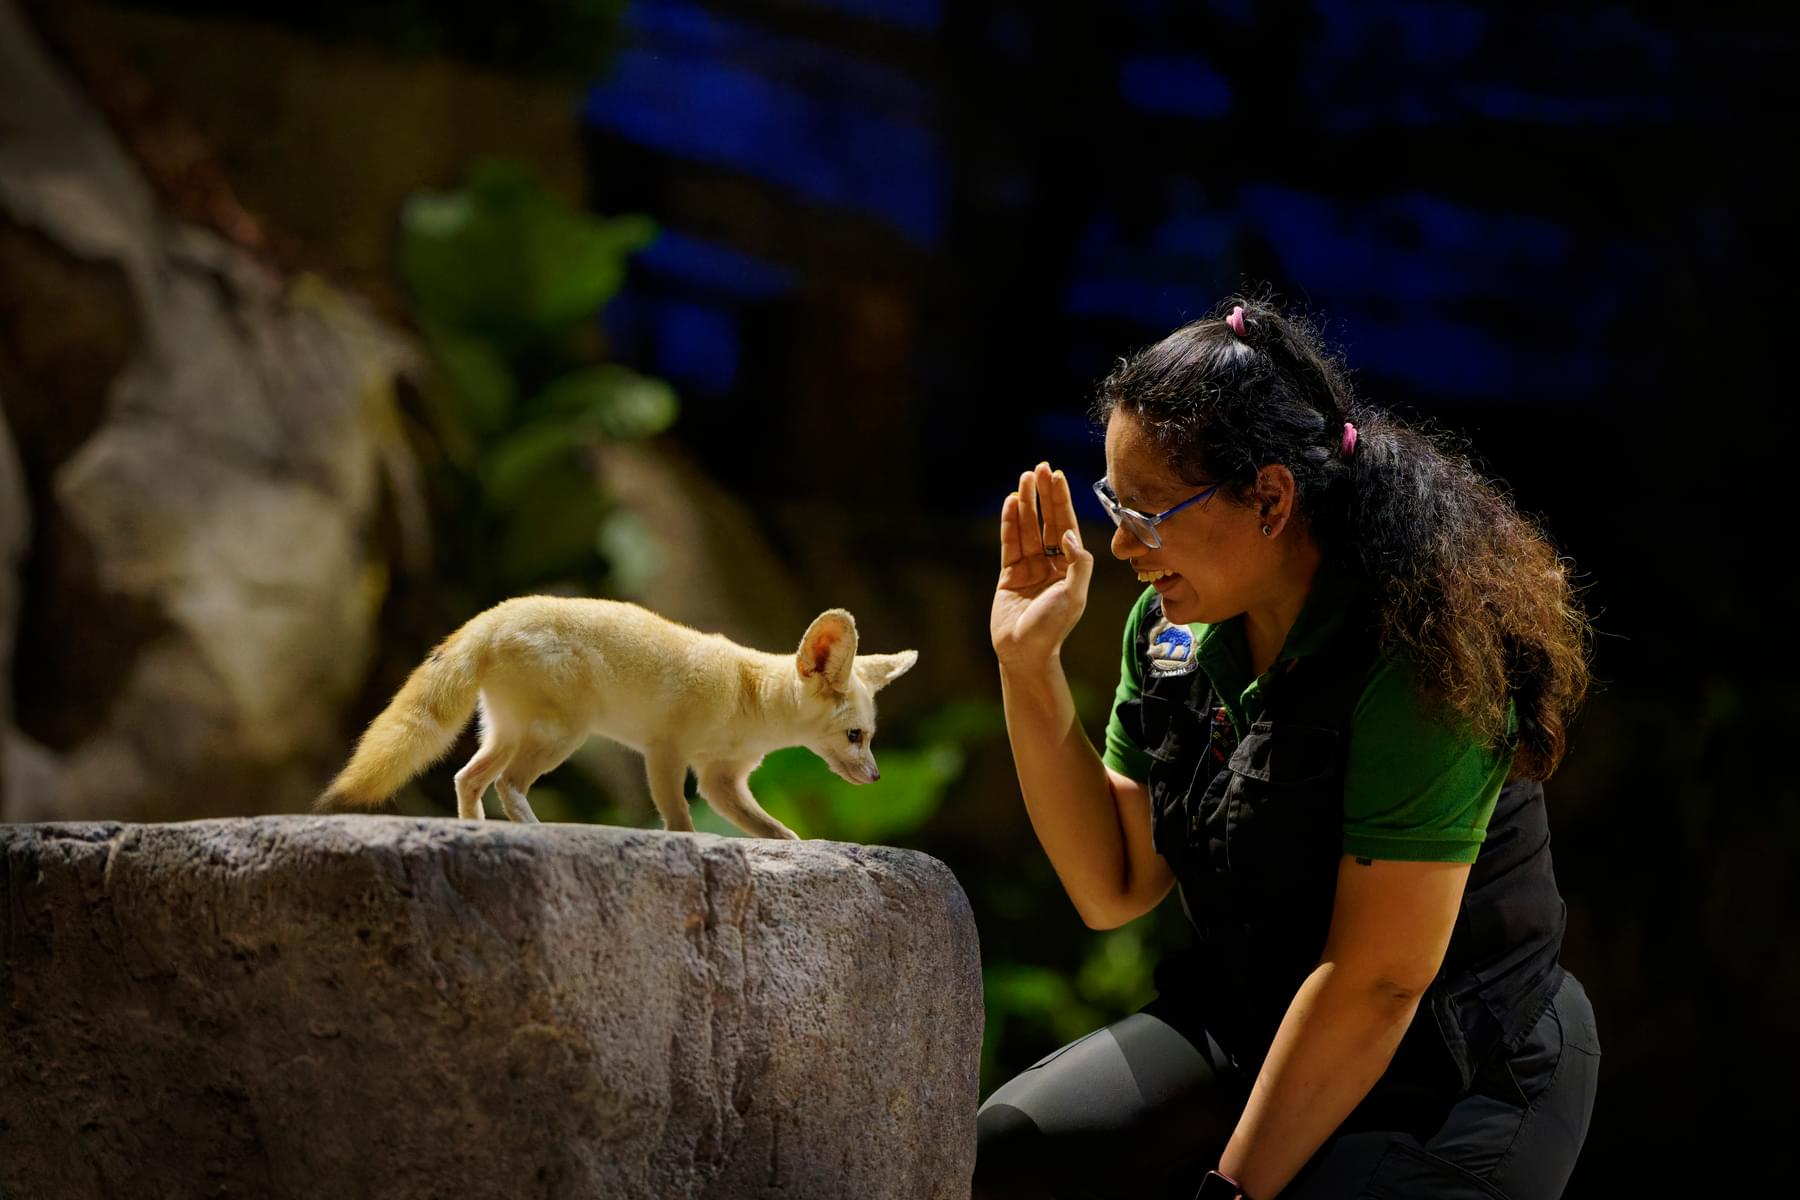 Learn more about the Fennec Fox at the keeper's talks